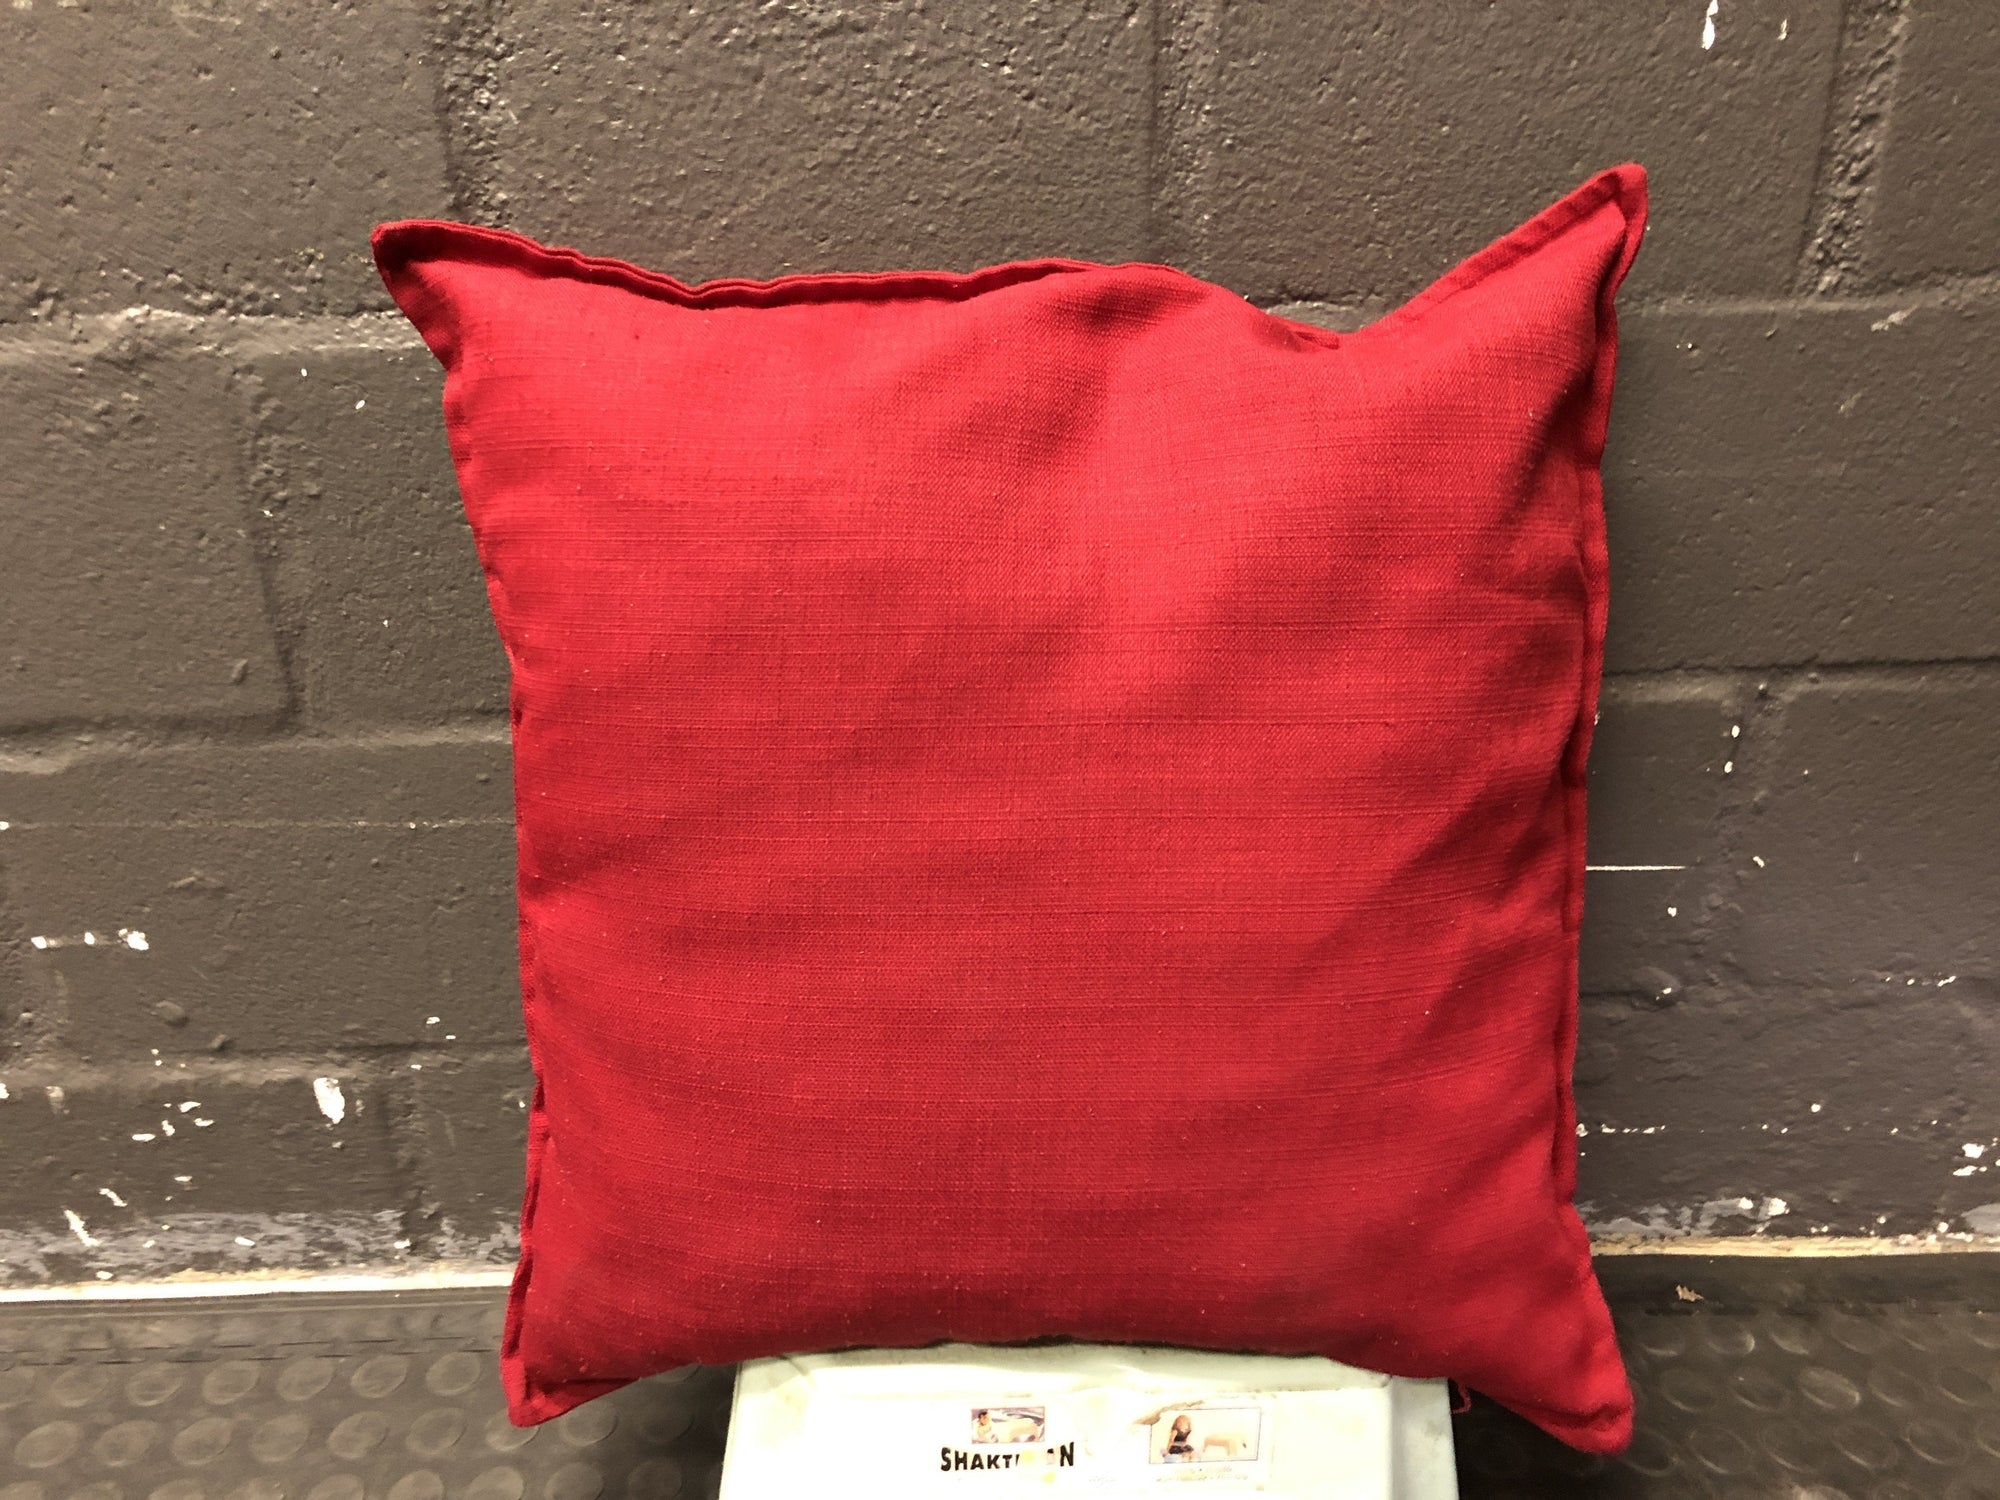 Large Red Cushion